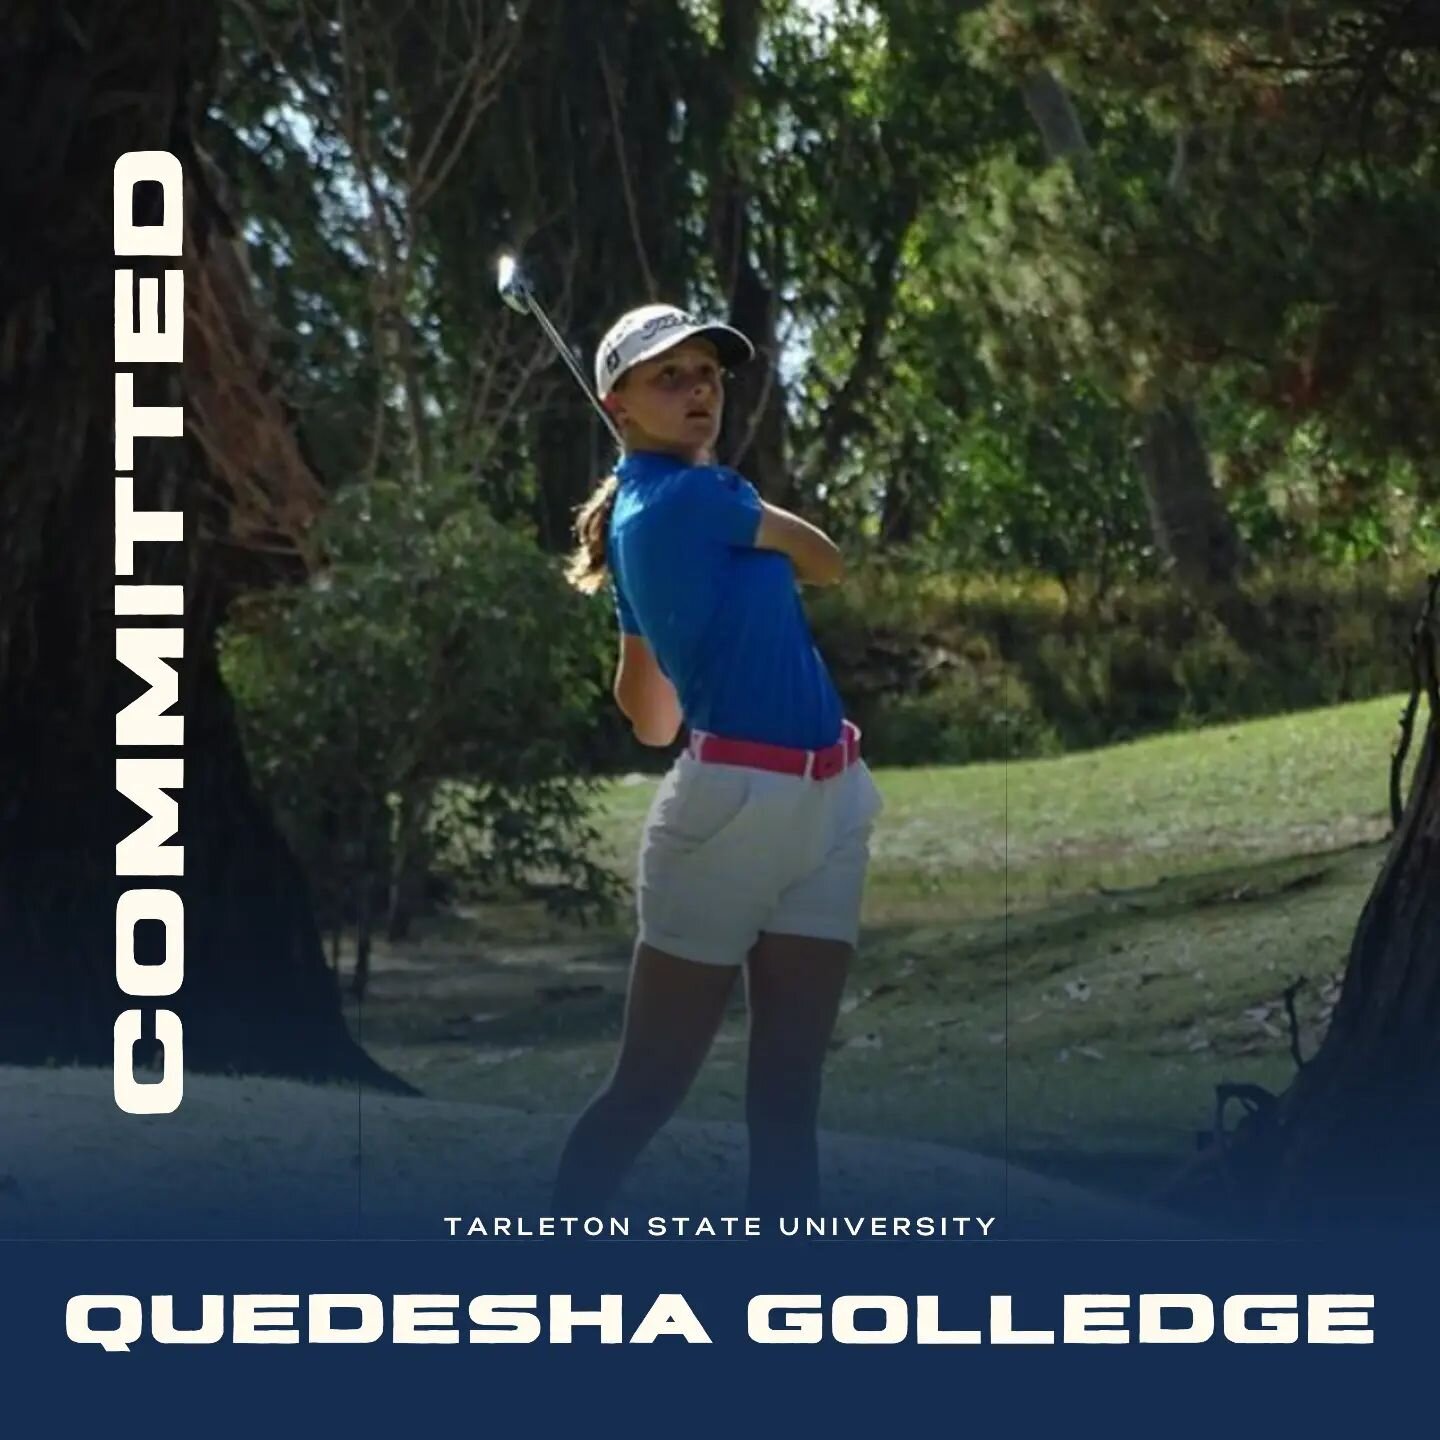 Congratulations to @quedeshagolf on her commitment to D1 @tarletonstate @tarletonwgolf 
.
.
.
.
.
#accrcommit #recruitment #collegebound #golf #ncaa #d1